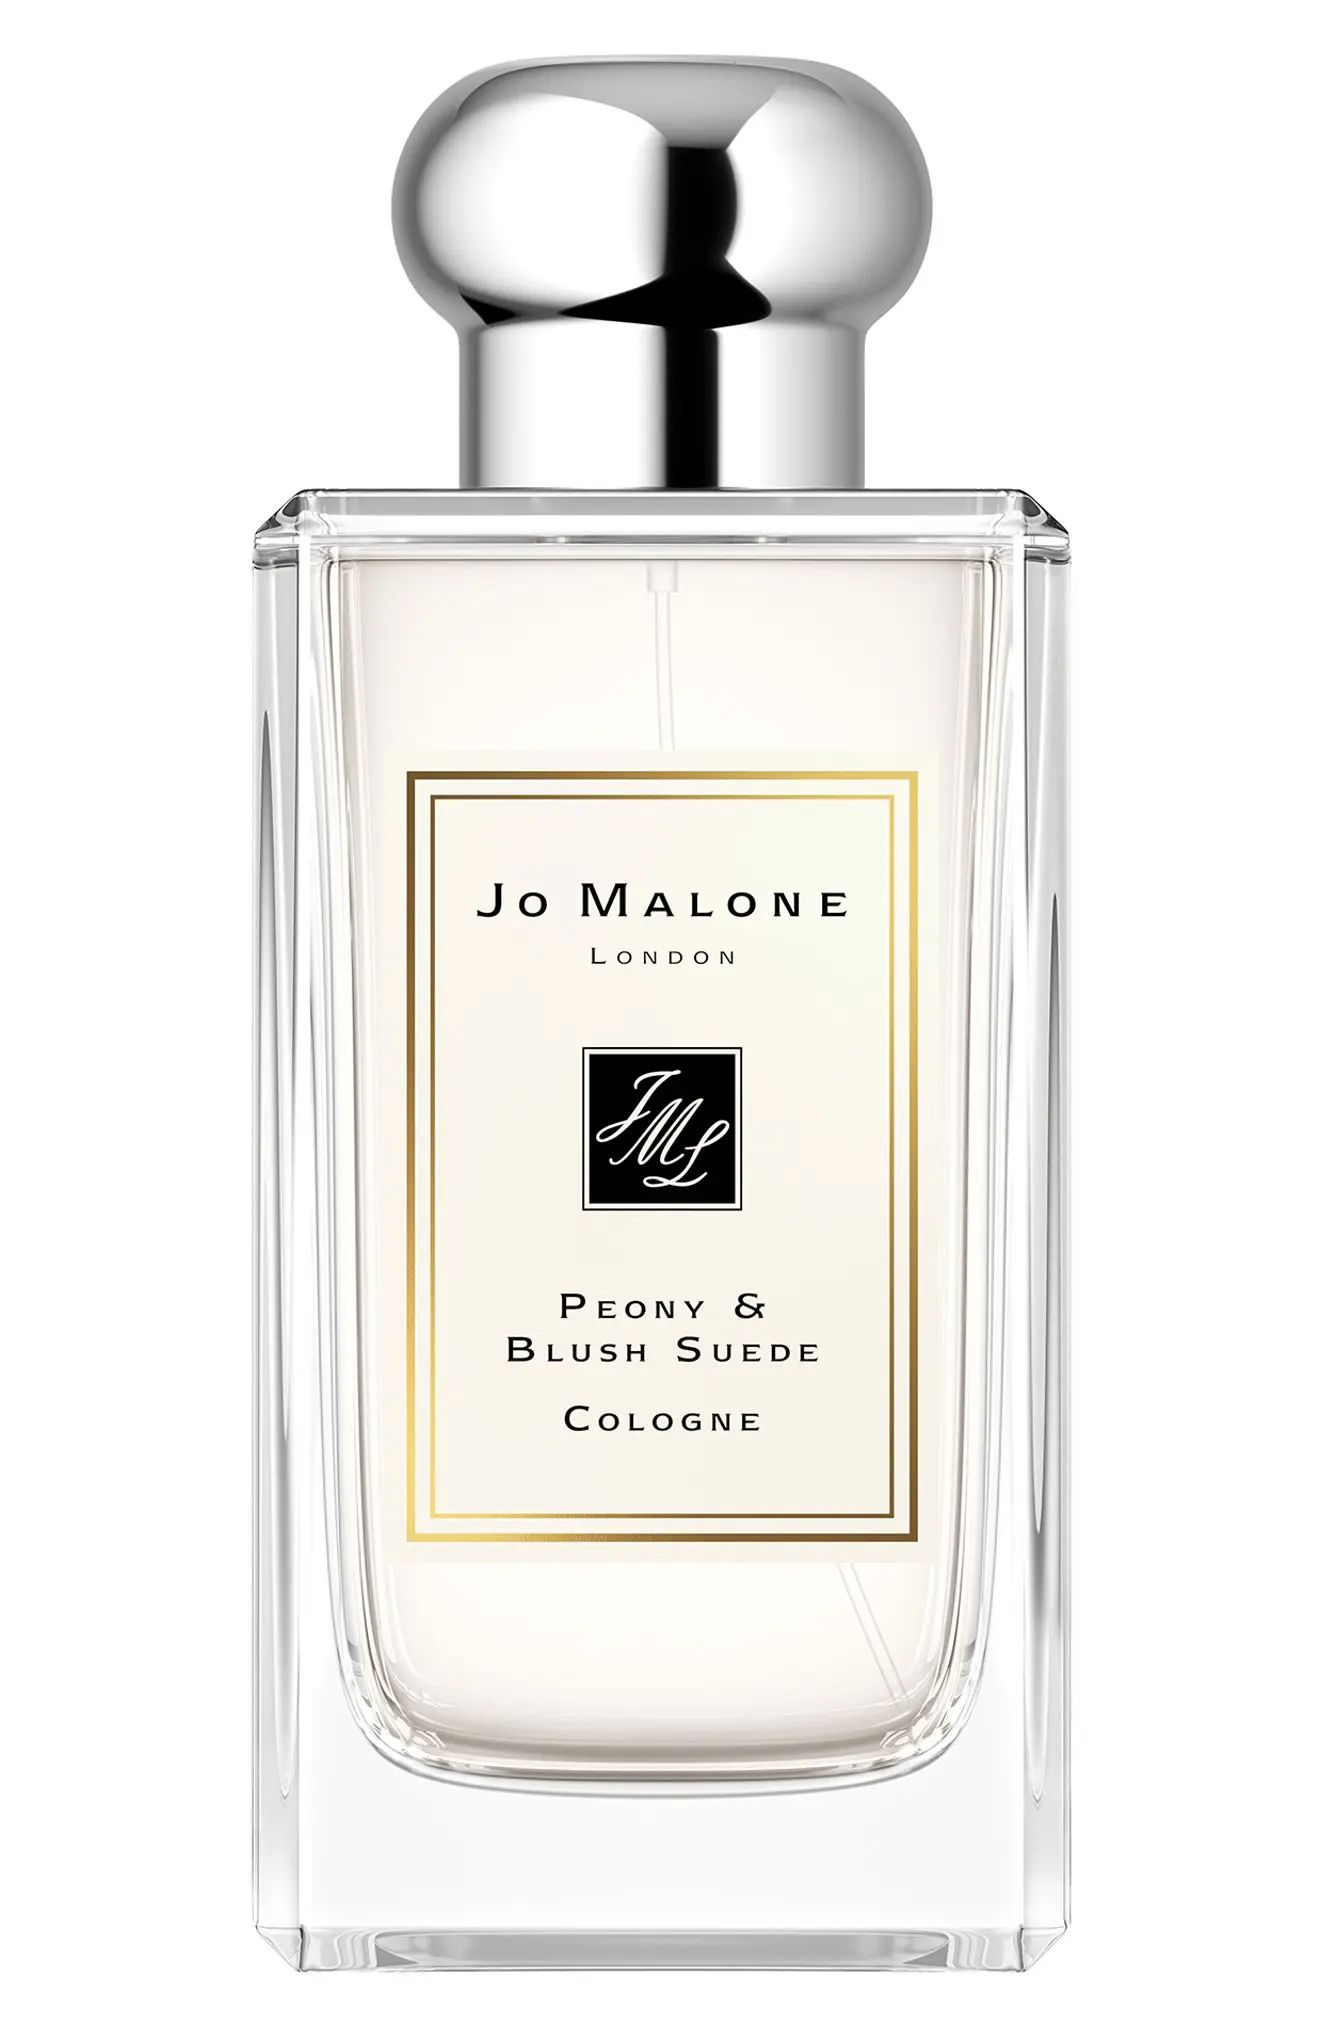 Jo Malone London(TM) Peony & Blush Suede Cologne, Size 3.4 Oz at Nordstrom | Nordstrom